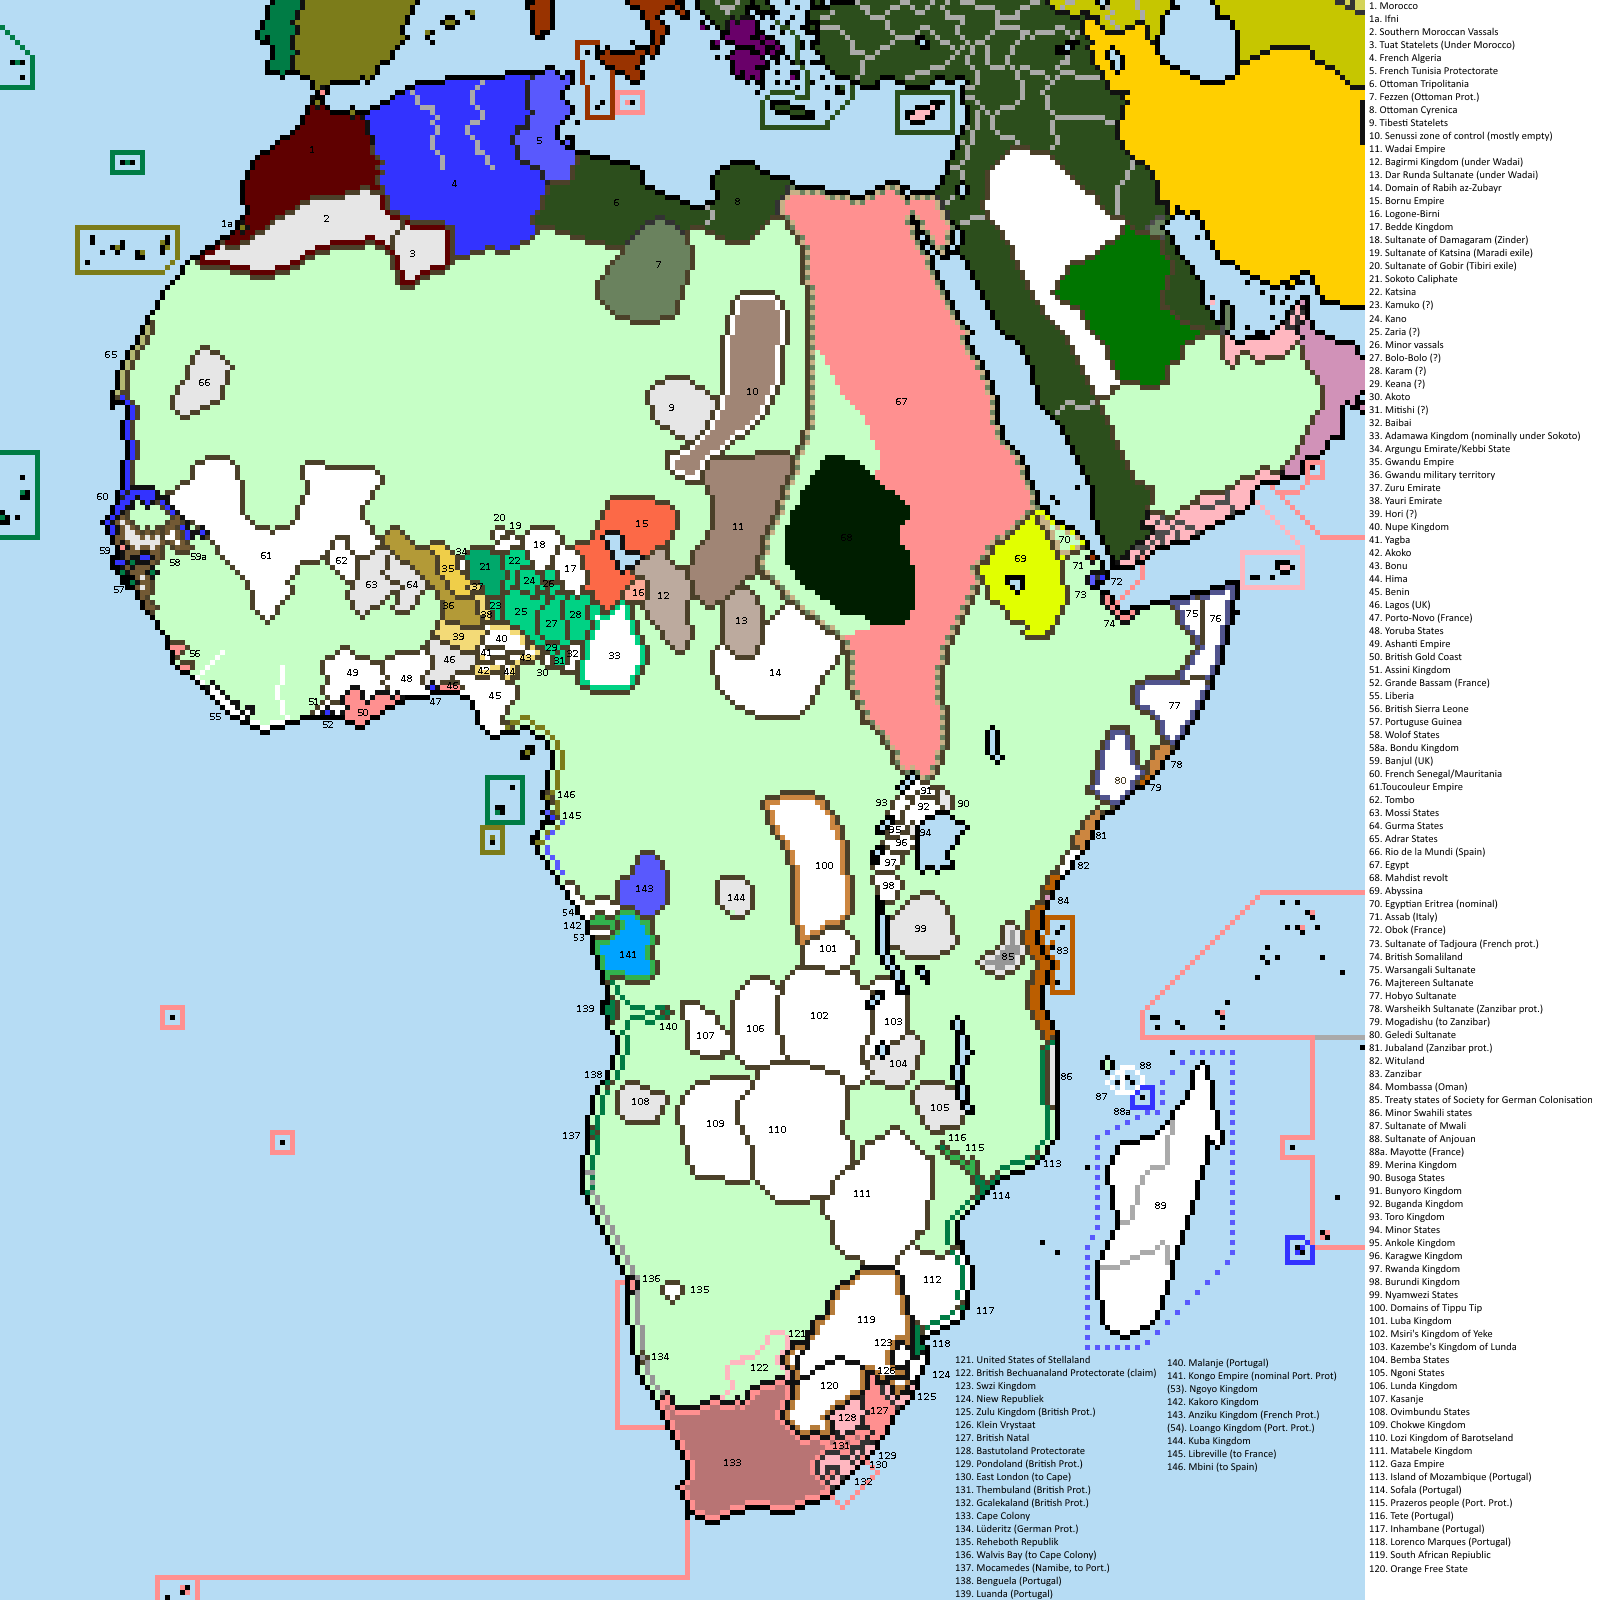 Africa 1885 enlarged.png